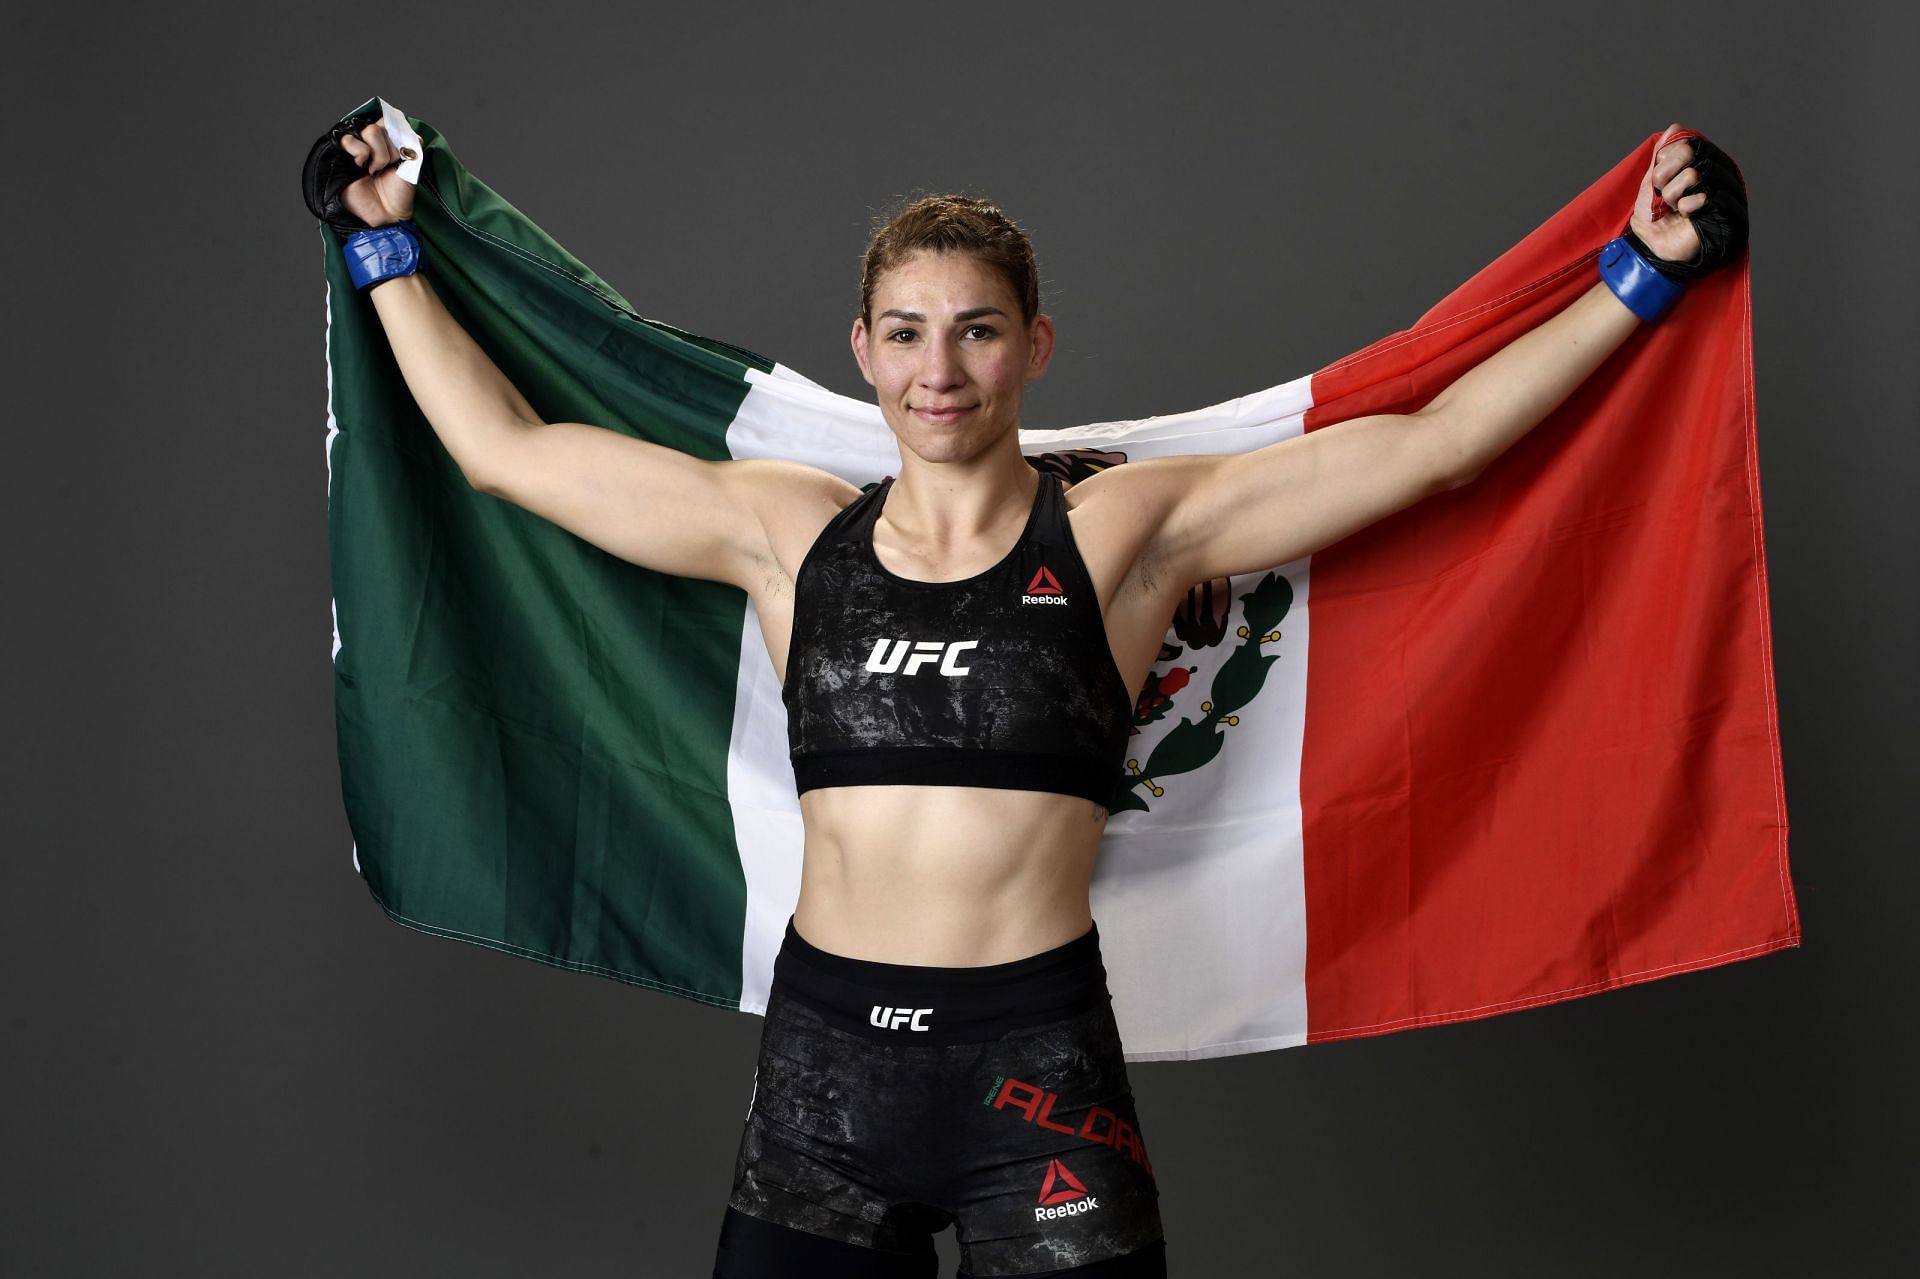 Mexico&rsquo;s Irene Aldana is the biggest dark horse in the bantamweight division right now.